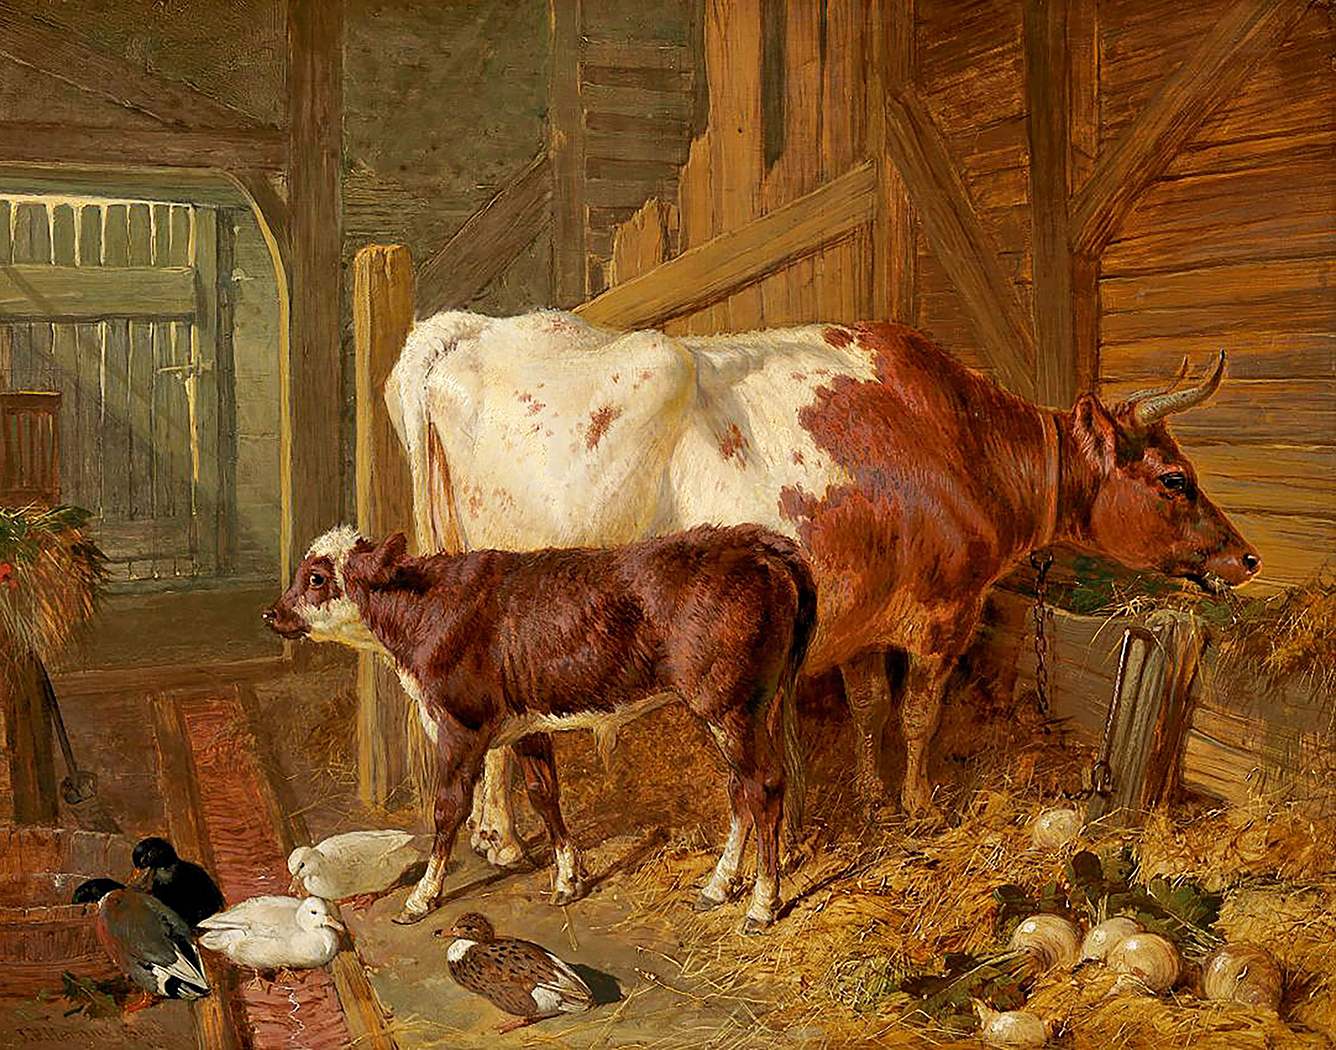 Farm/Pastoral Farm A Cow and Her Calf in Stable Interior  ...